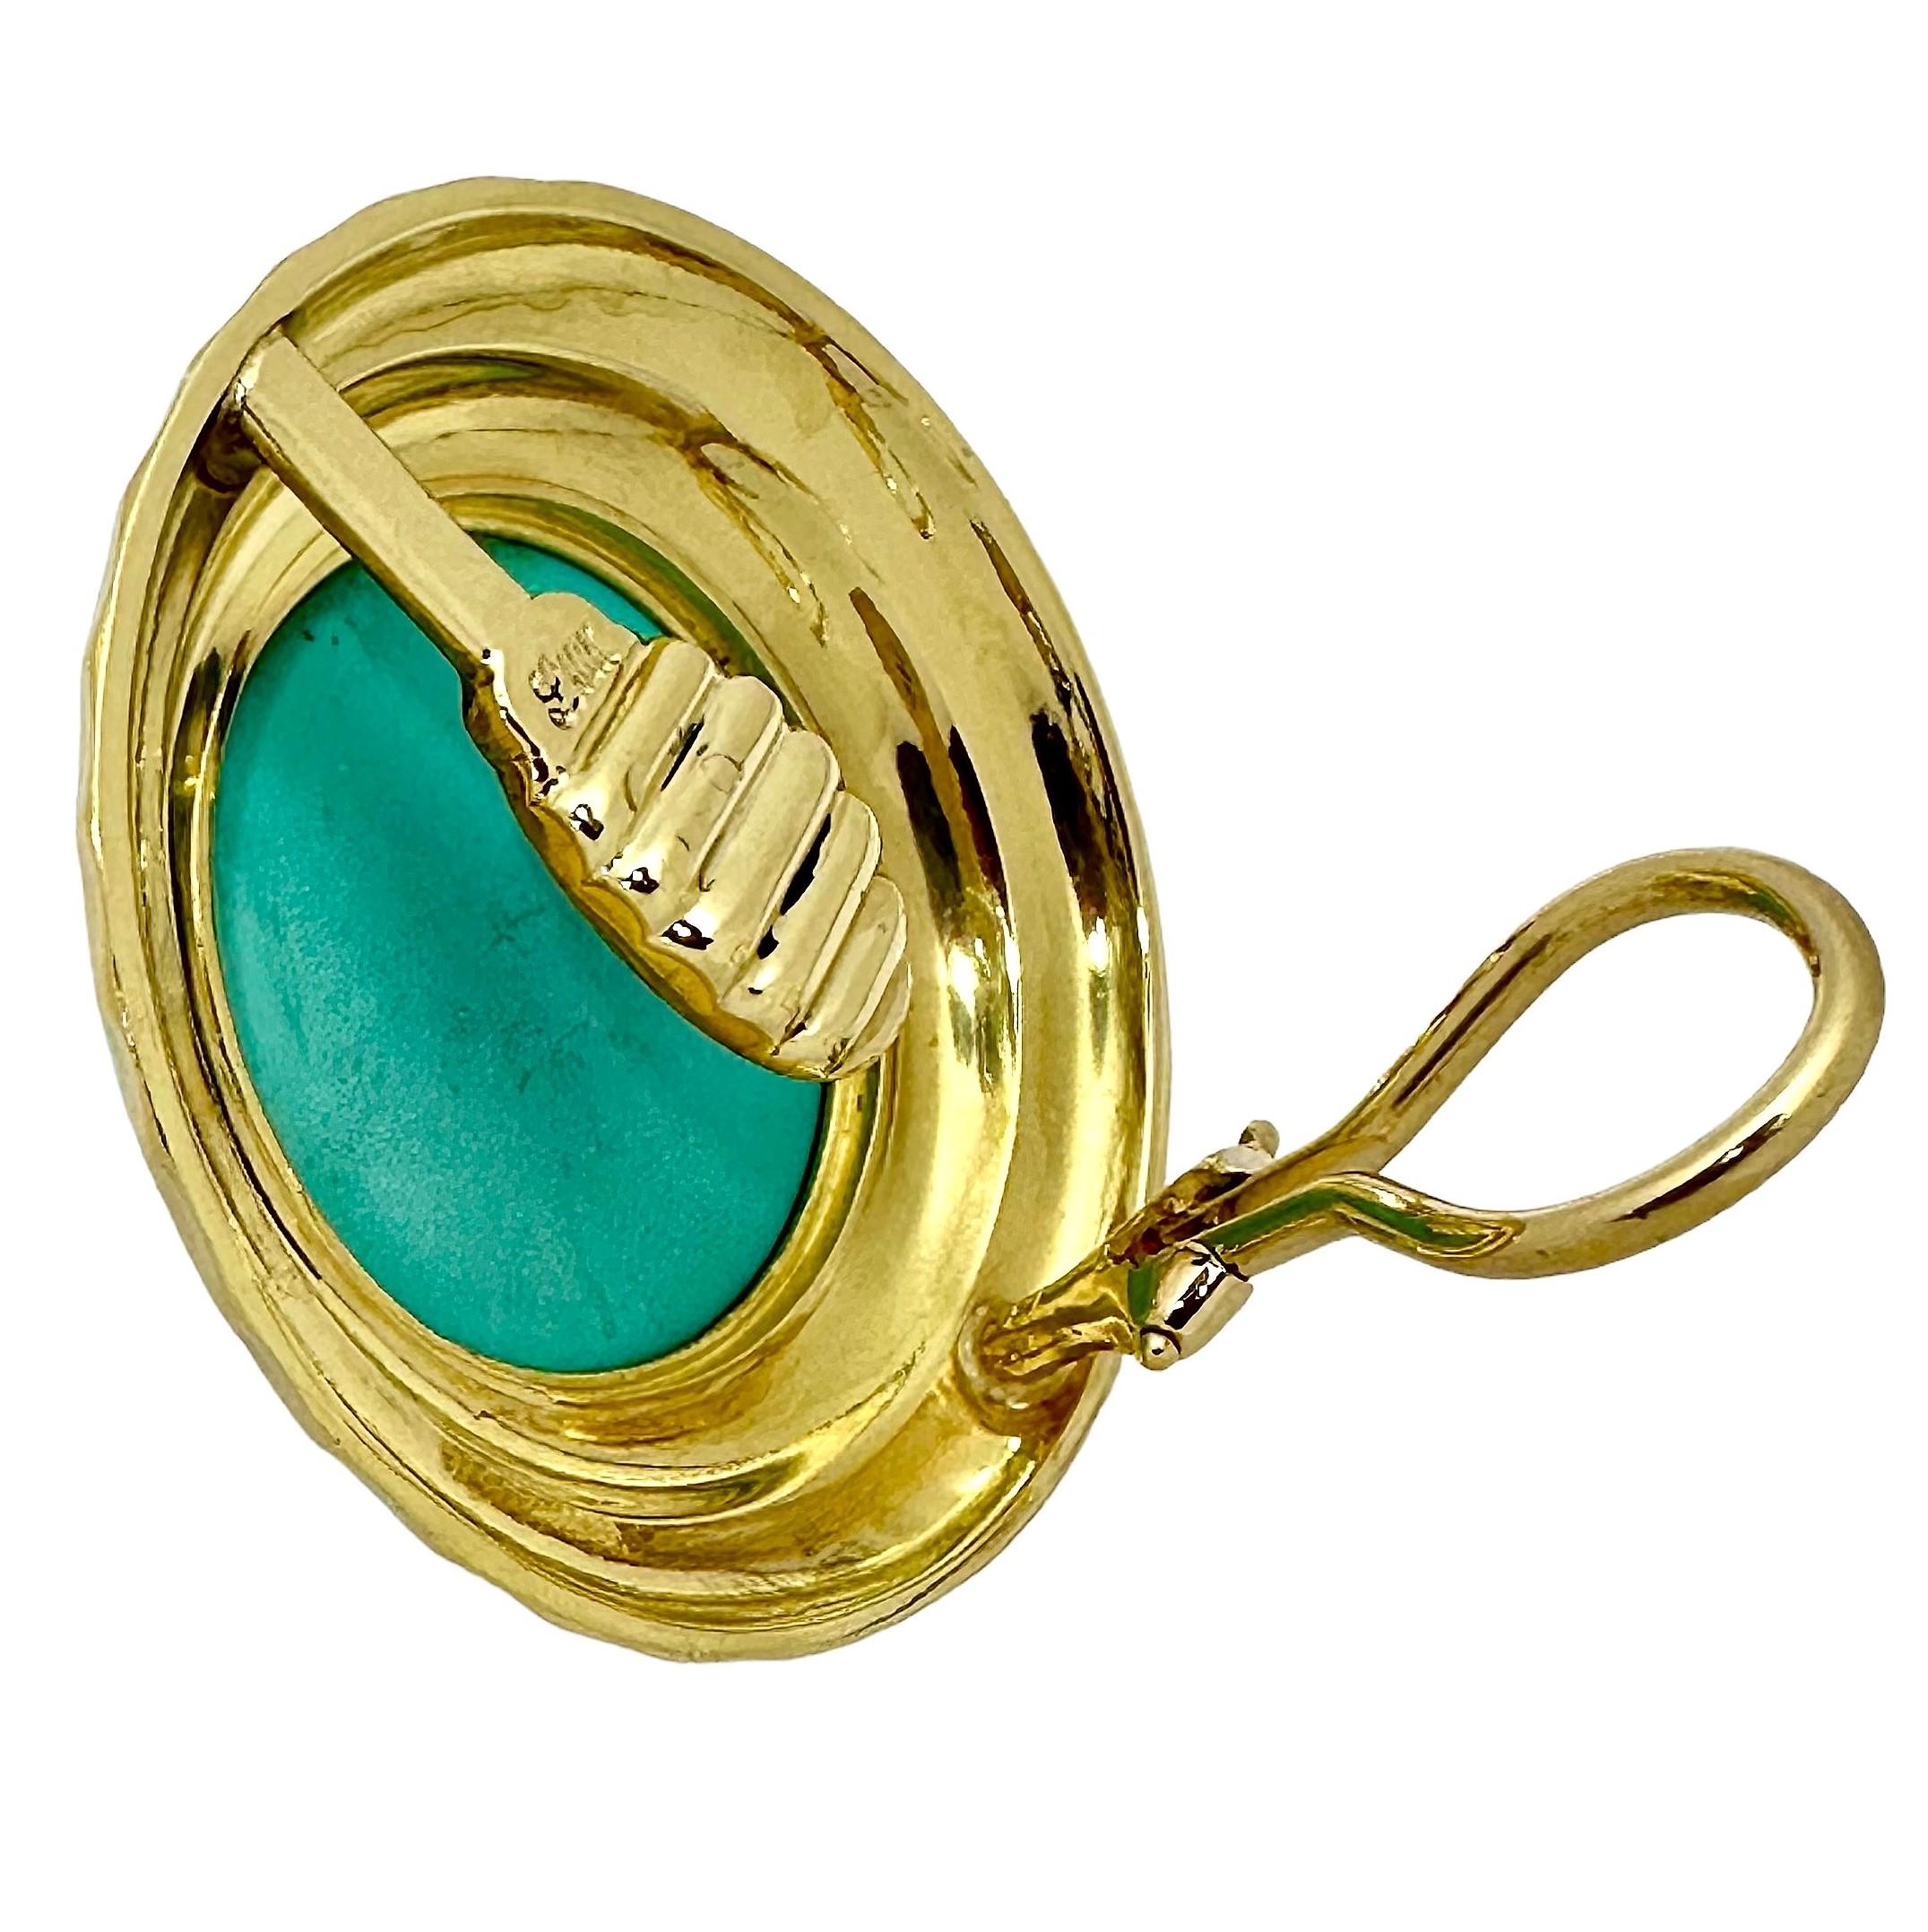 Cabochon Mid-20th Century Hammered 18K Yellow Gold and Turquoise Earrings